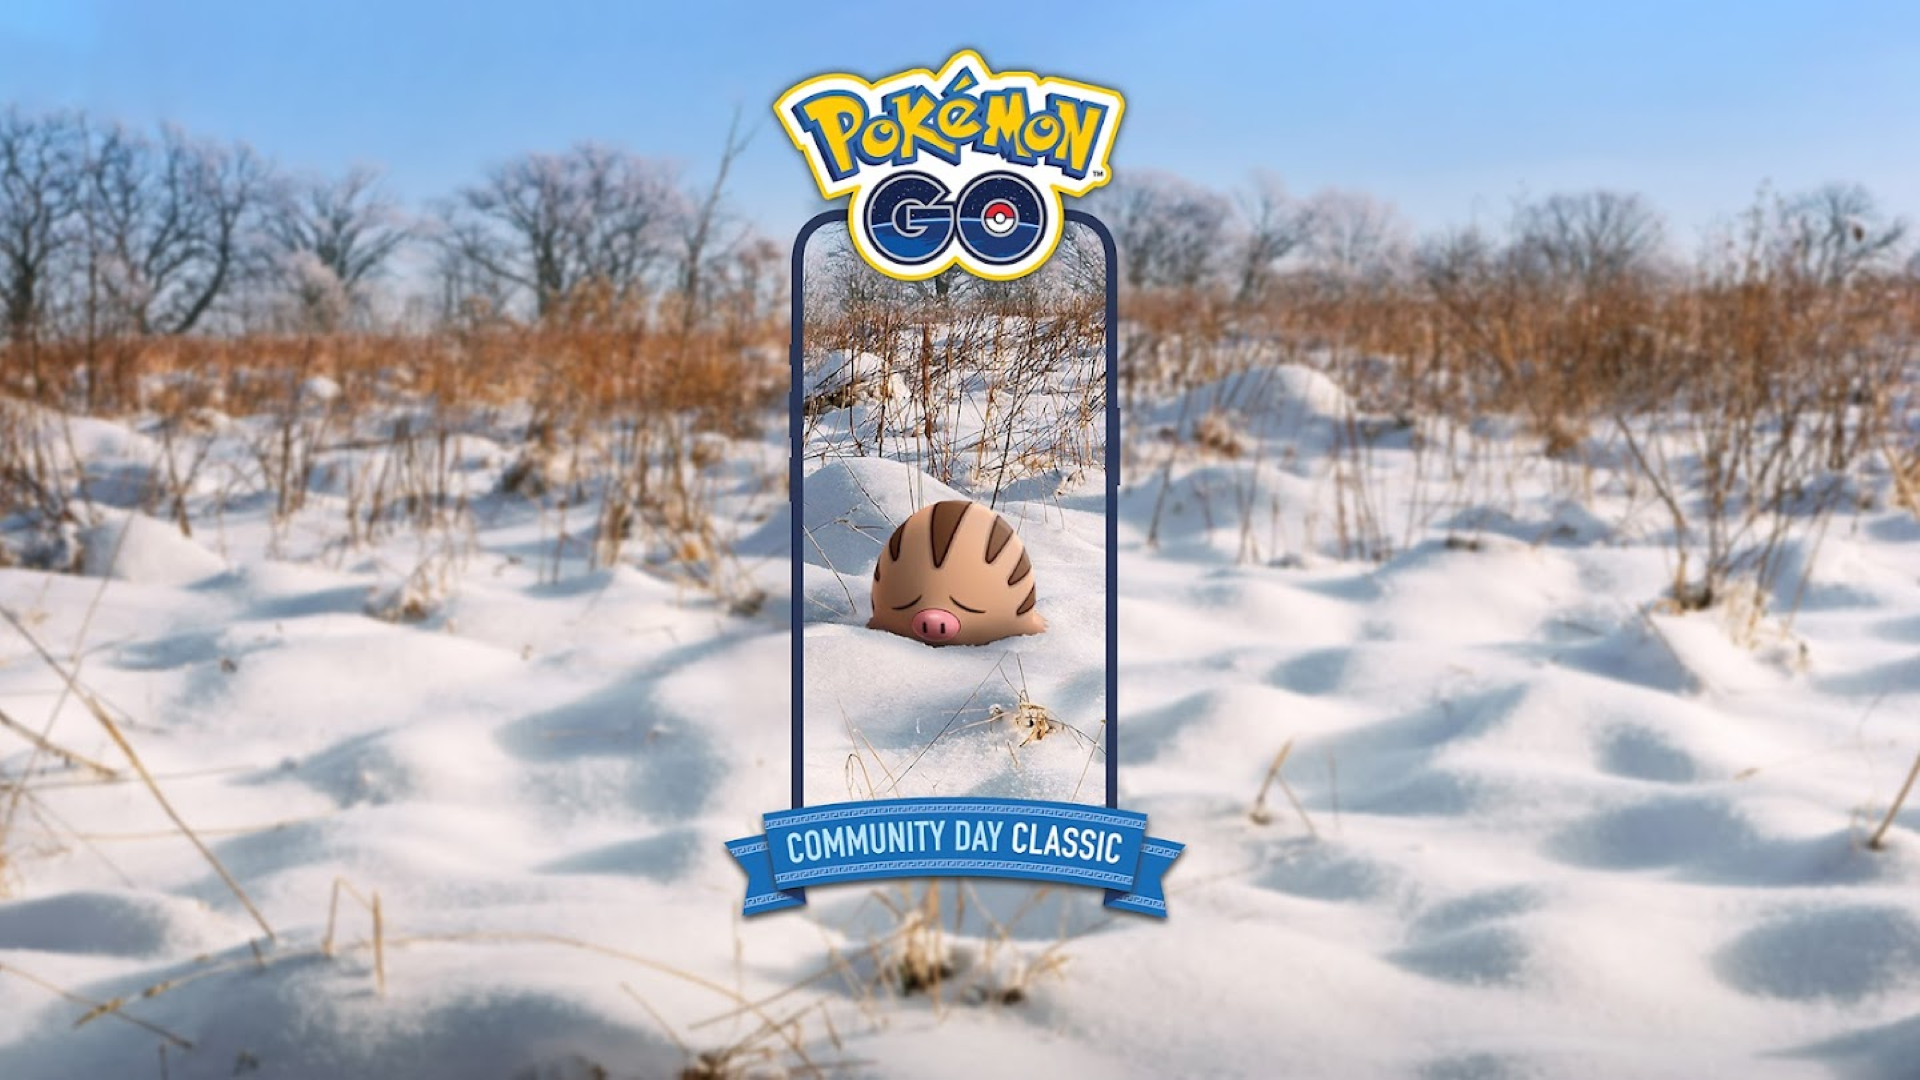 Community Day Classic has a fan-favourite this week in Pokémon Go